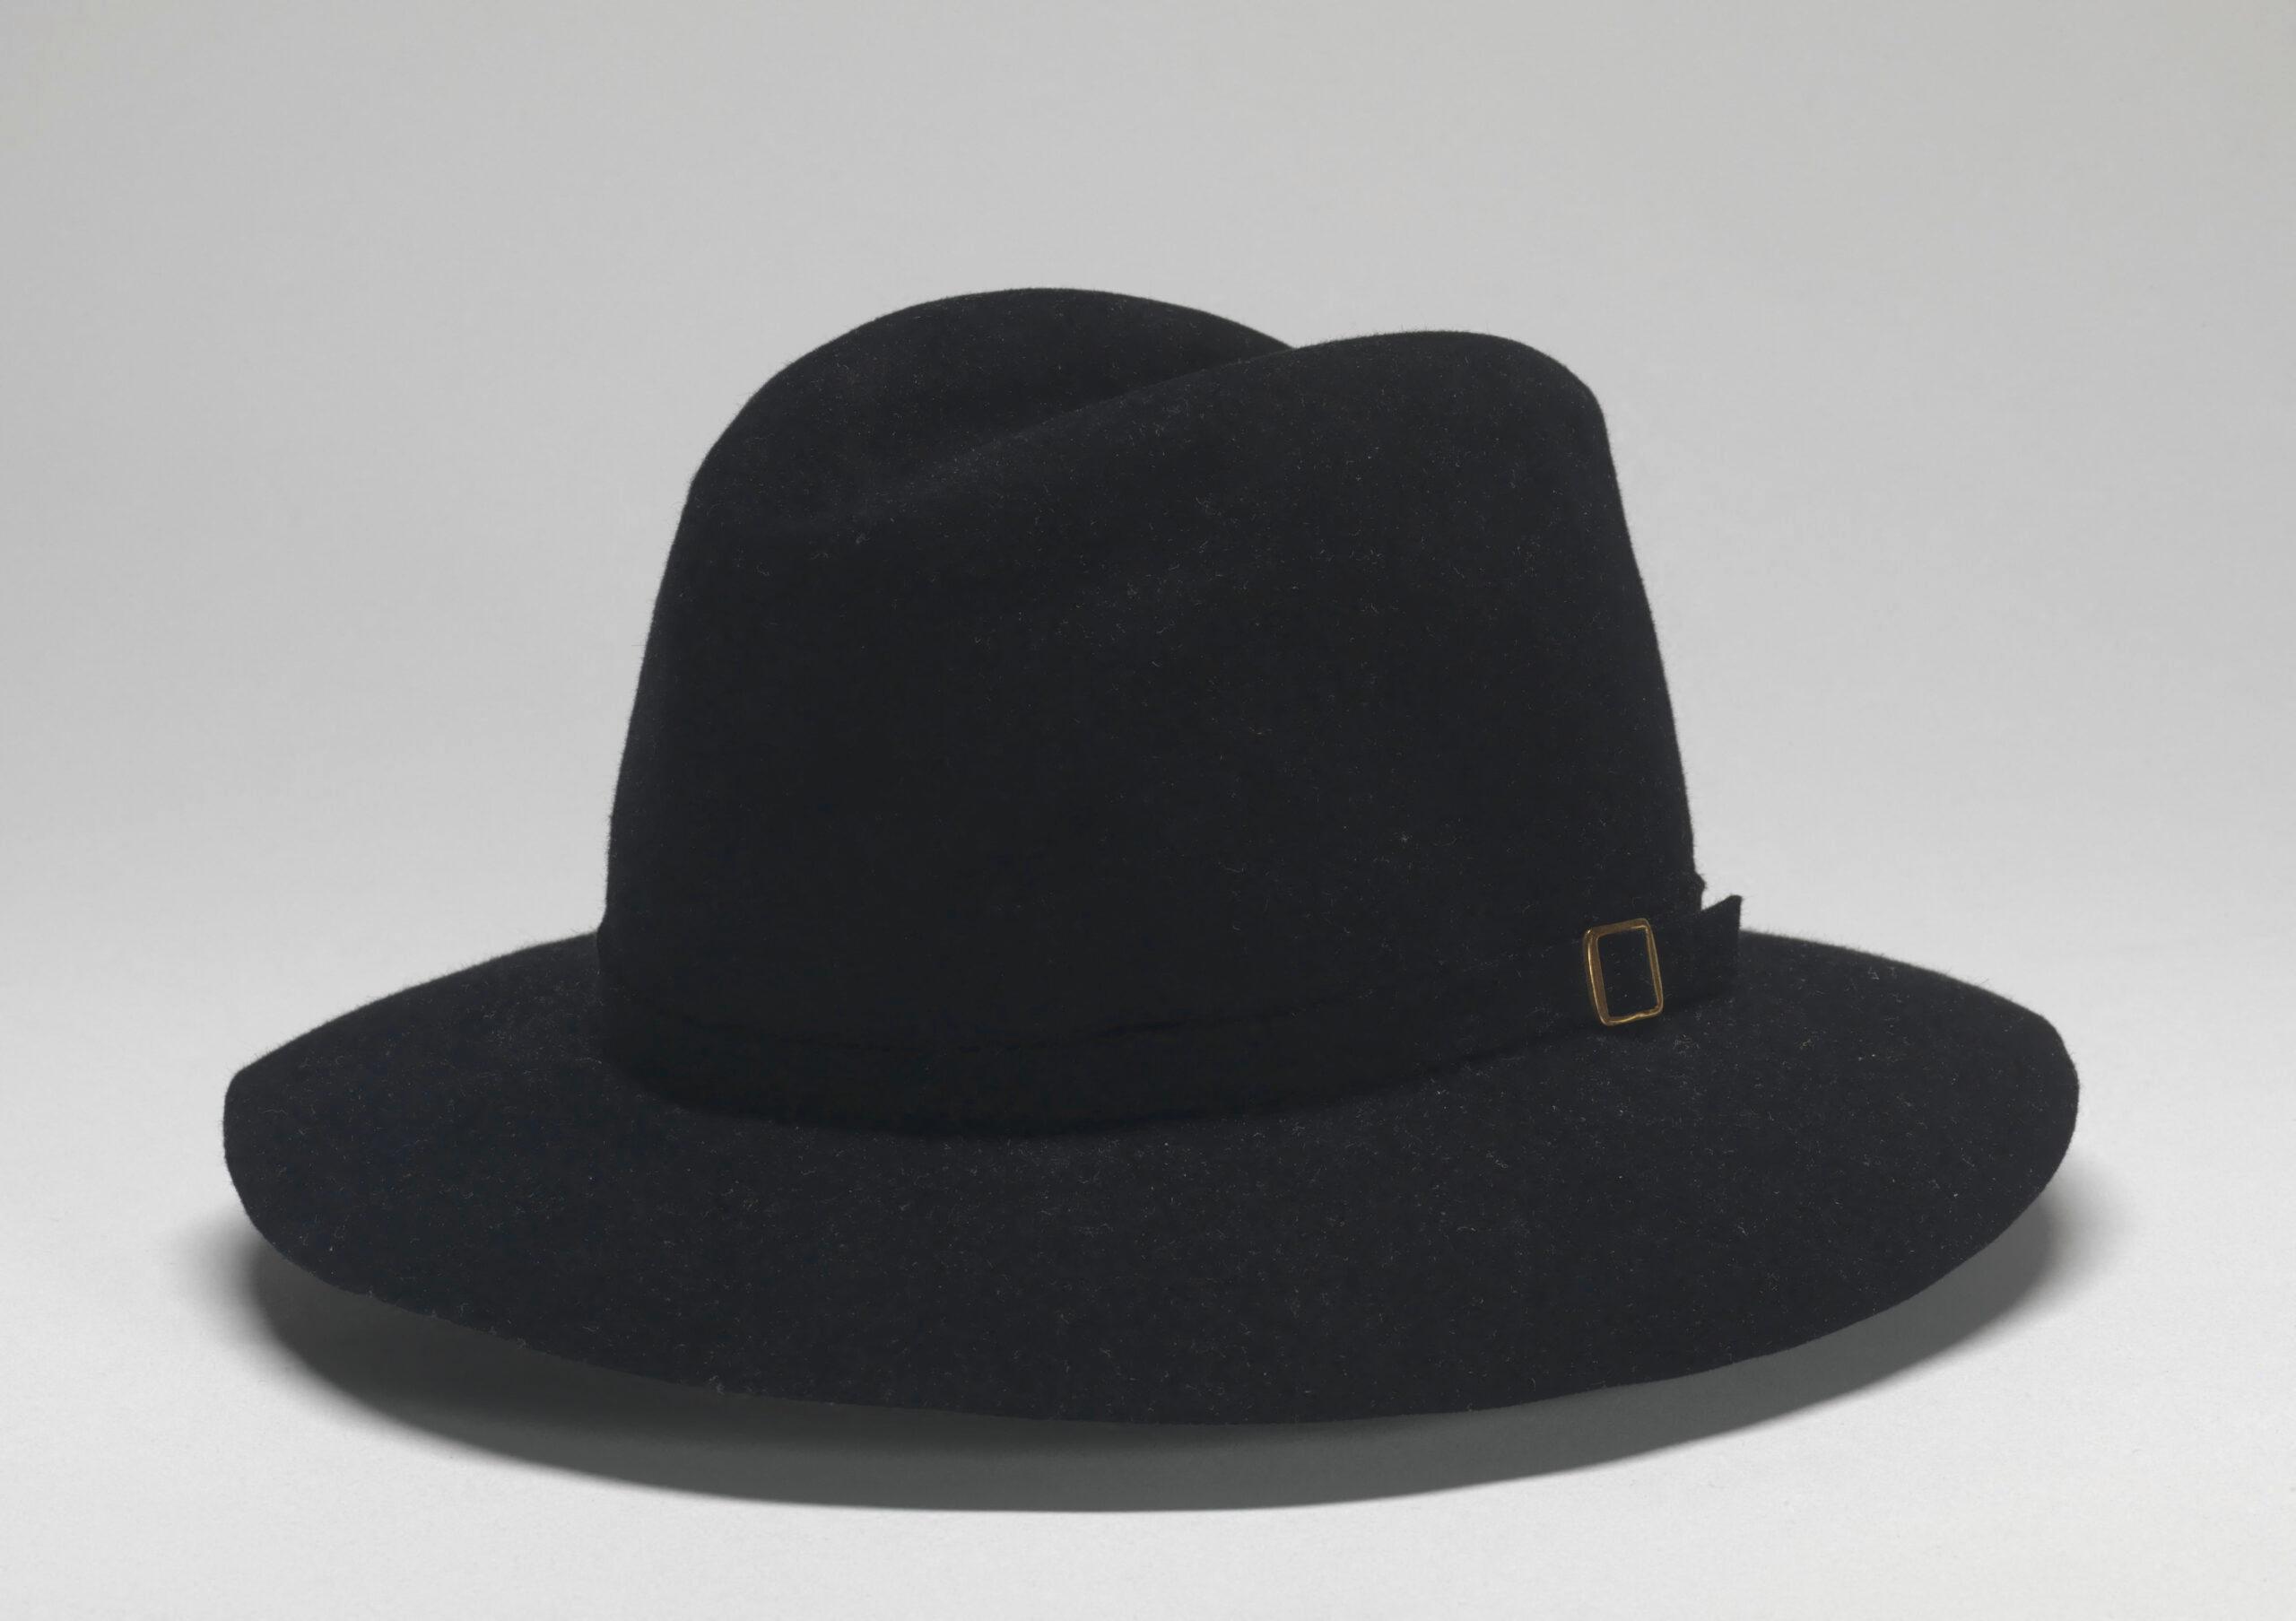 Michael Jackson's Famed Moonwalk Fedora Hat To Be Auctioned